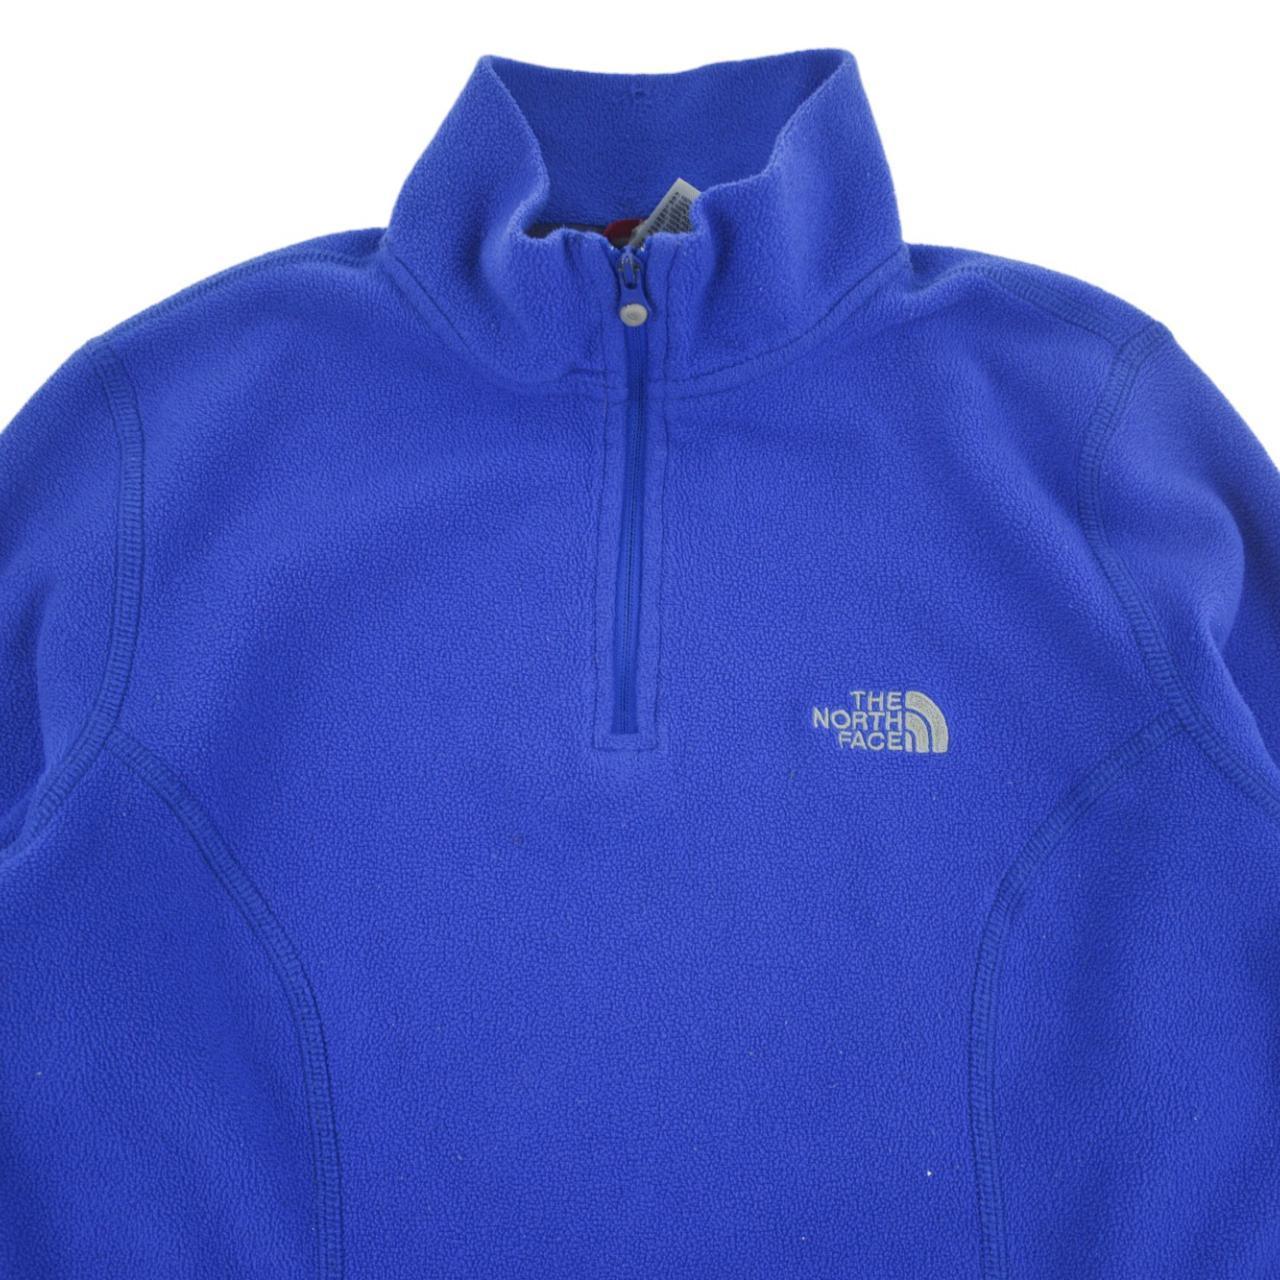 Vintage The North Face Fleece Women's Size S - Known Source